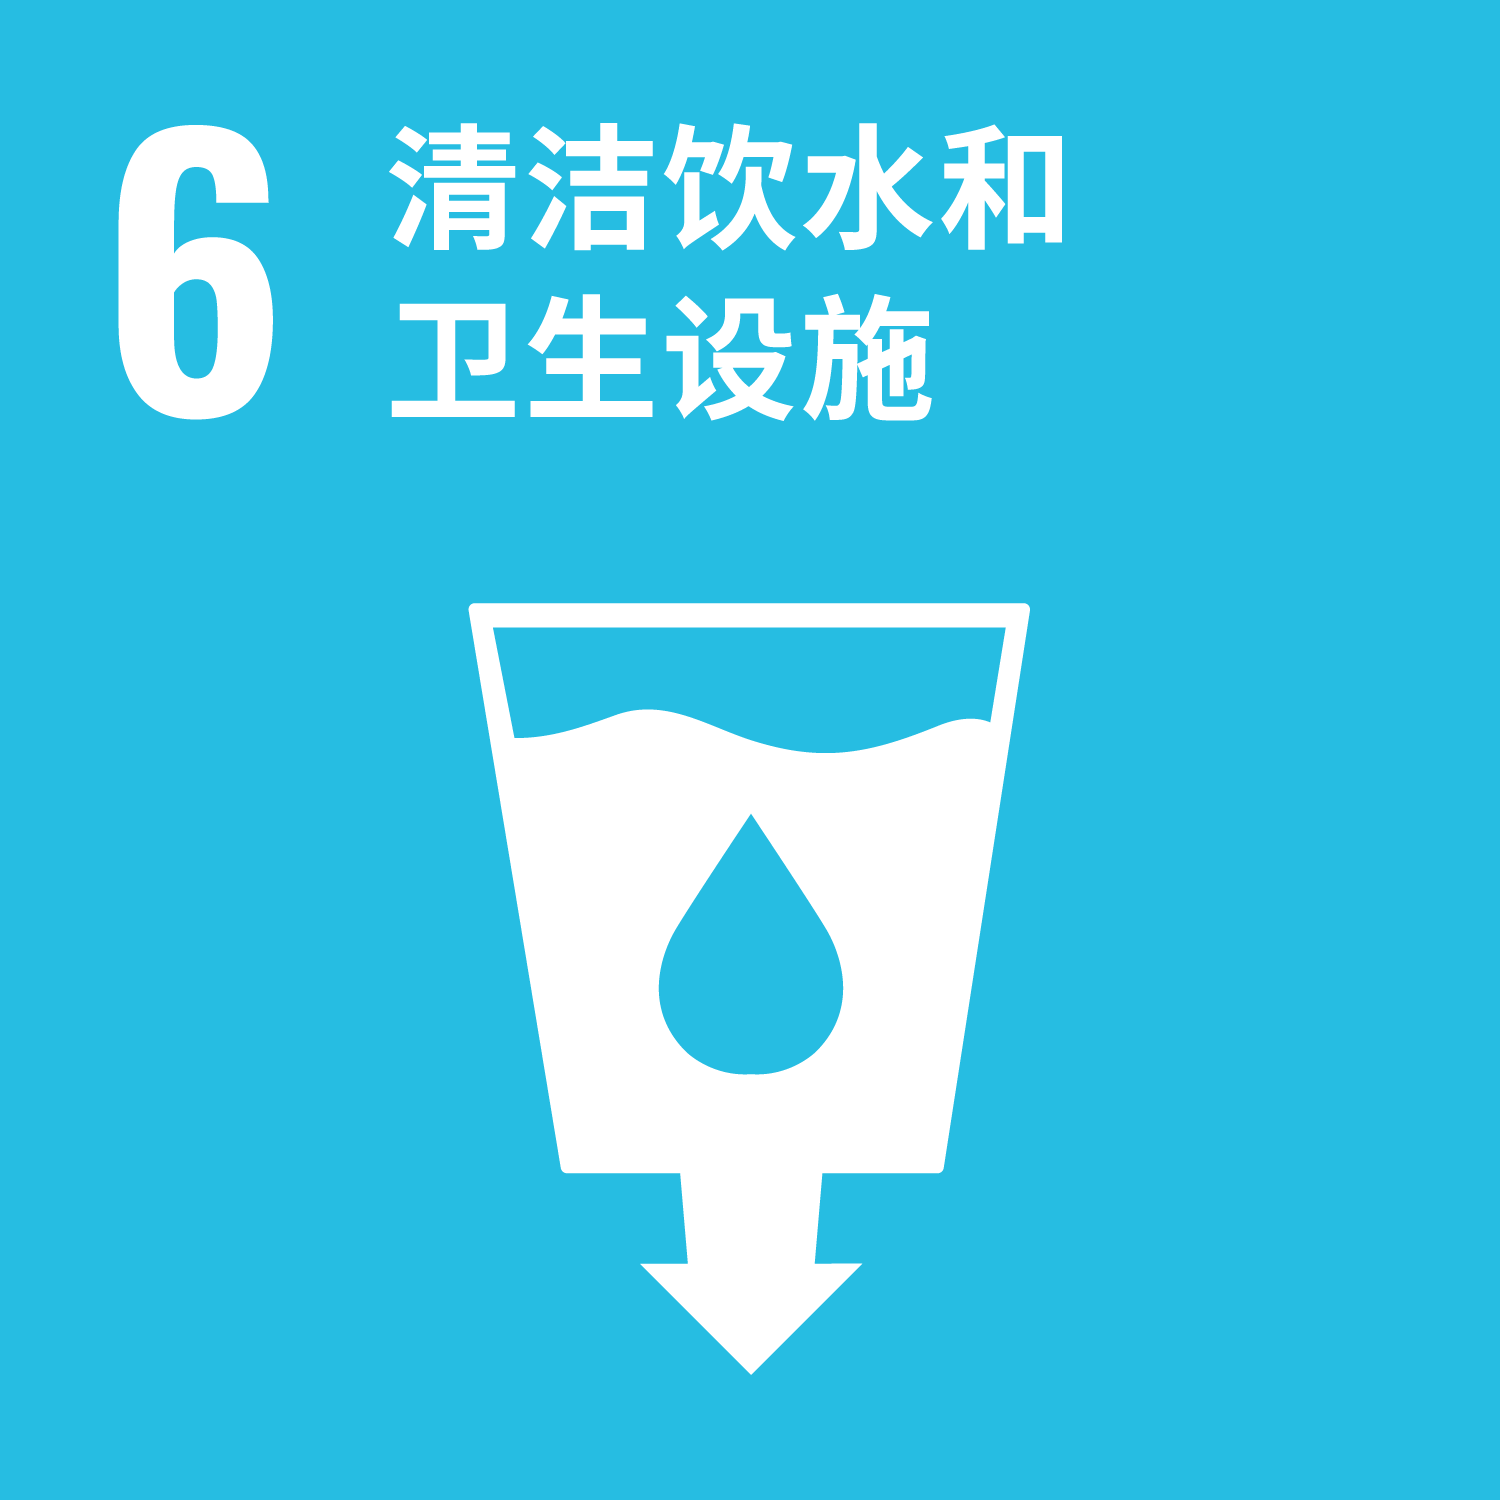 6 - CLEAN WATER AND SANITATION